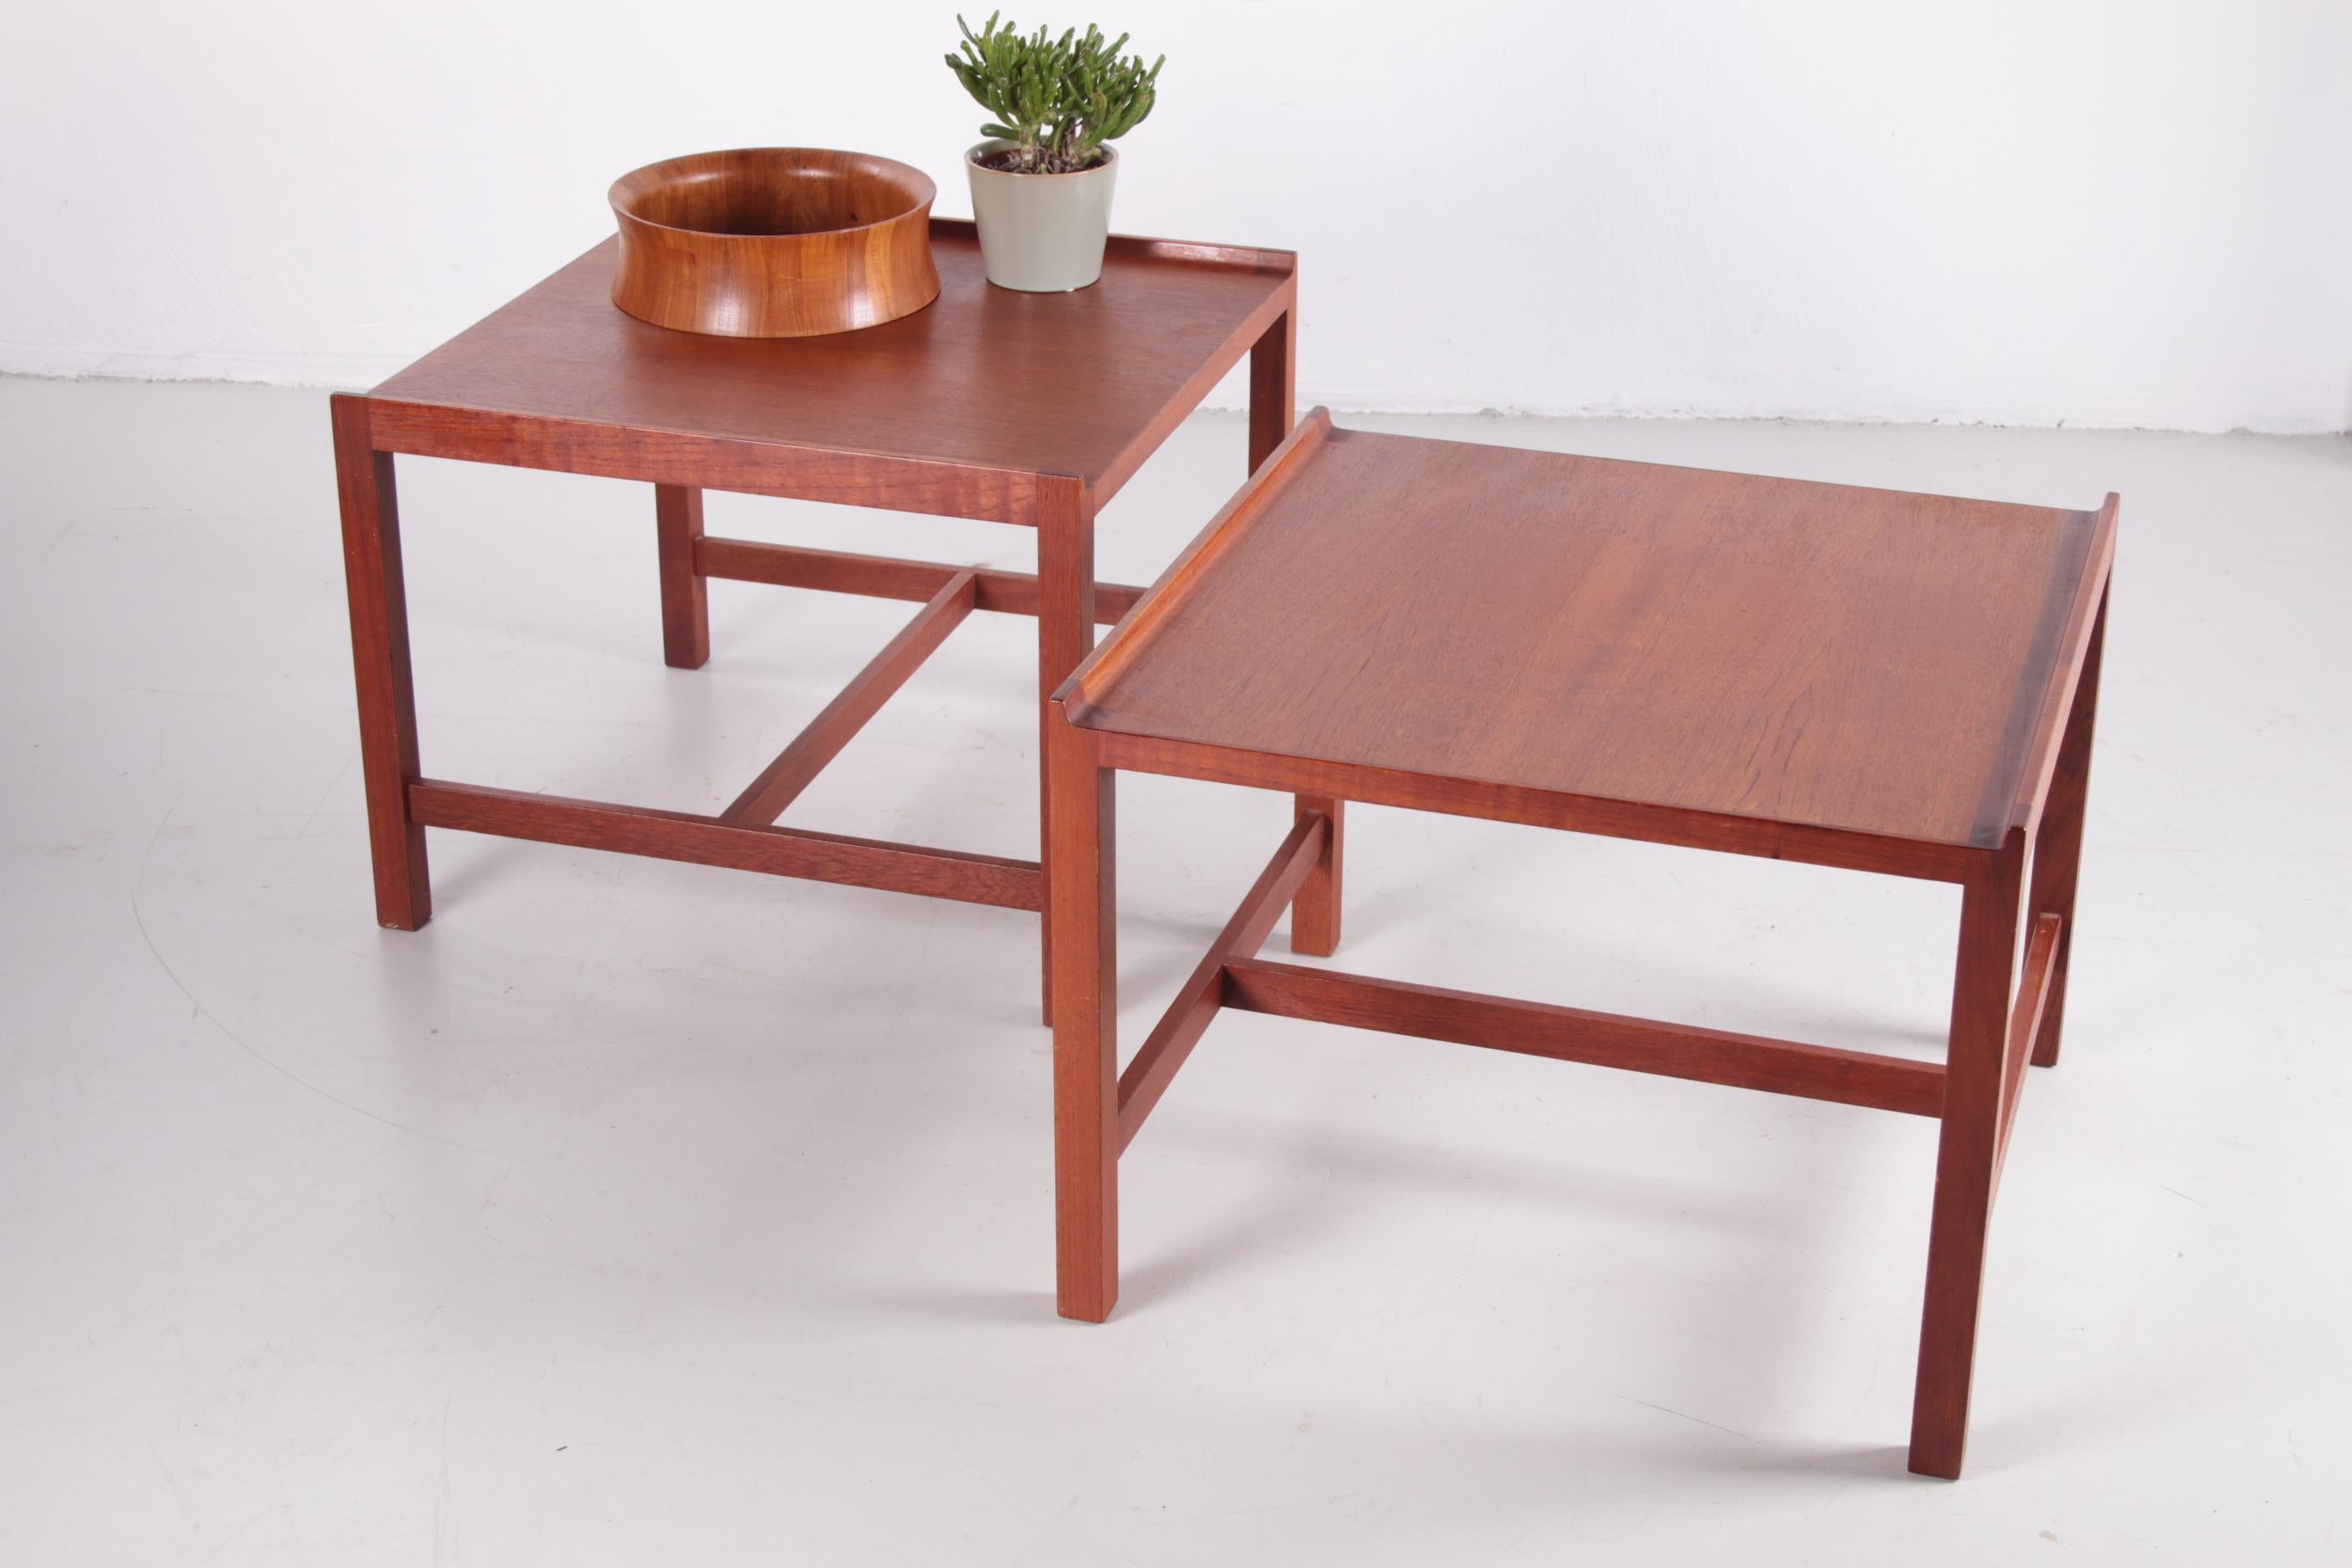 Illums Bolighus Danish set of teak tables, 1960 Denmark.

A lovely pair of mid-century Danish side tables in teak, with a clean, minimalist design by Illums Bolighus.

Pair of Danish teak side tables nice to put together for a larger coffee table